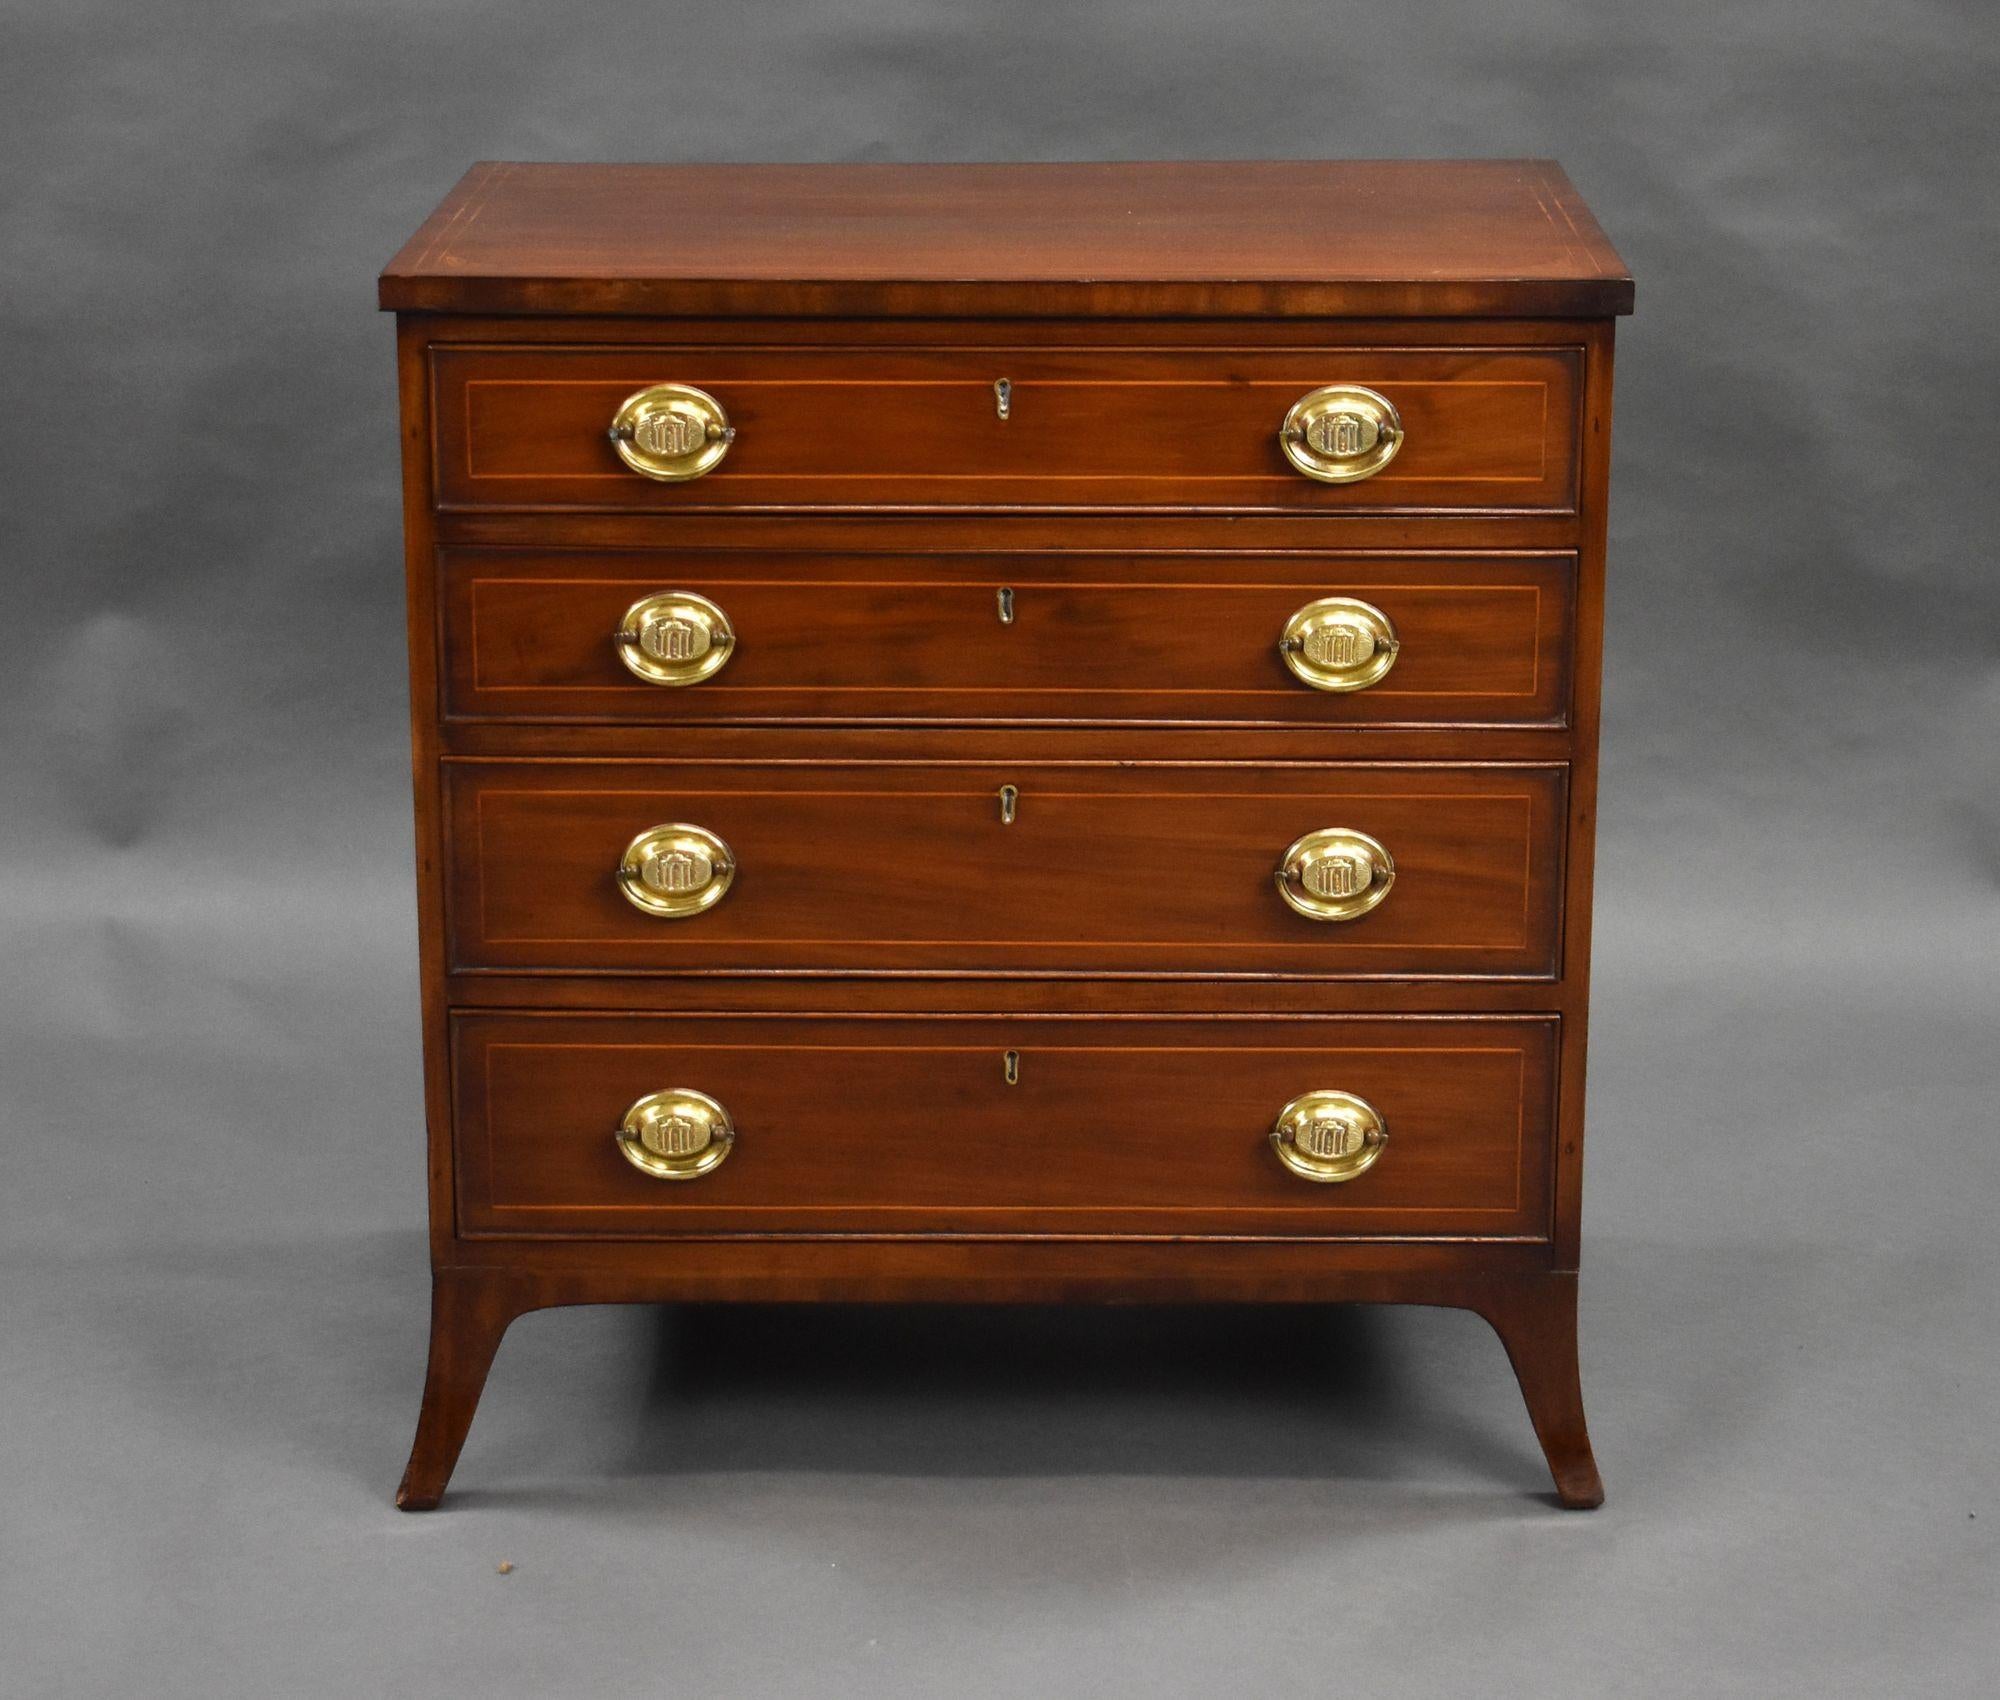 For sale is a good quality small Regency mahogany chest of drawers, having an inlaid top, above a series of four graduated drawers each with brass handles, the chest stands on splayed feet and remains in very good condition.

Width: 68cm Depth: 42cm